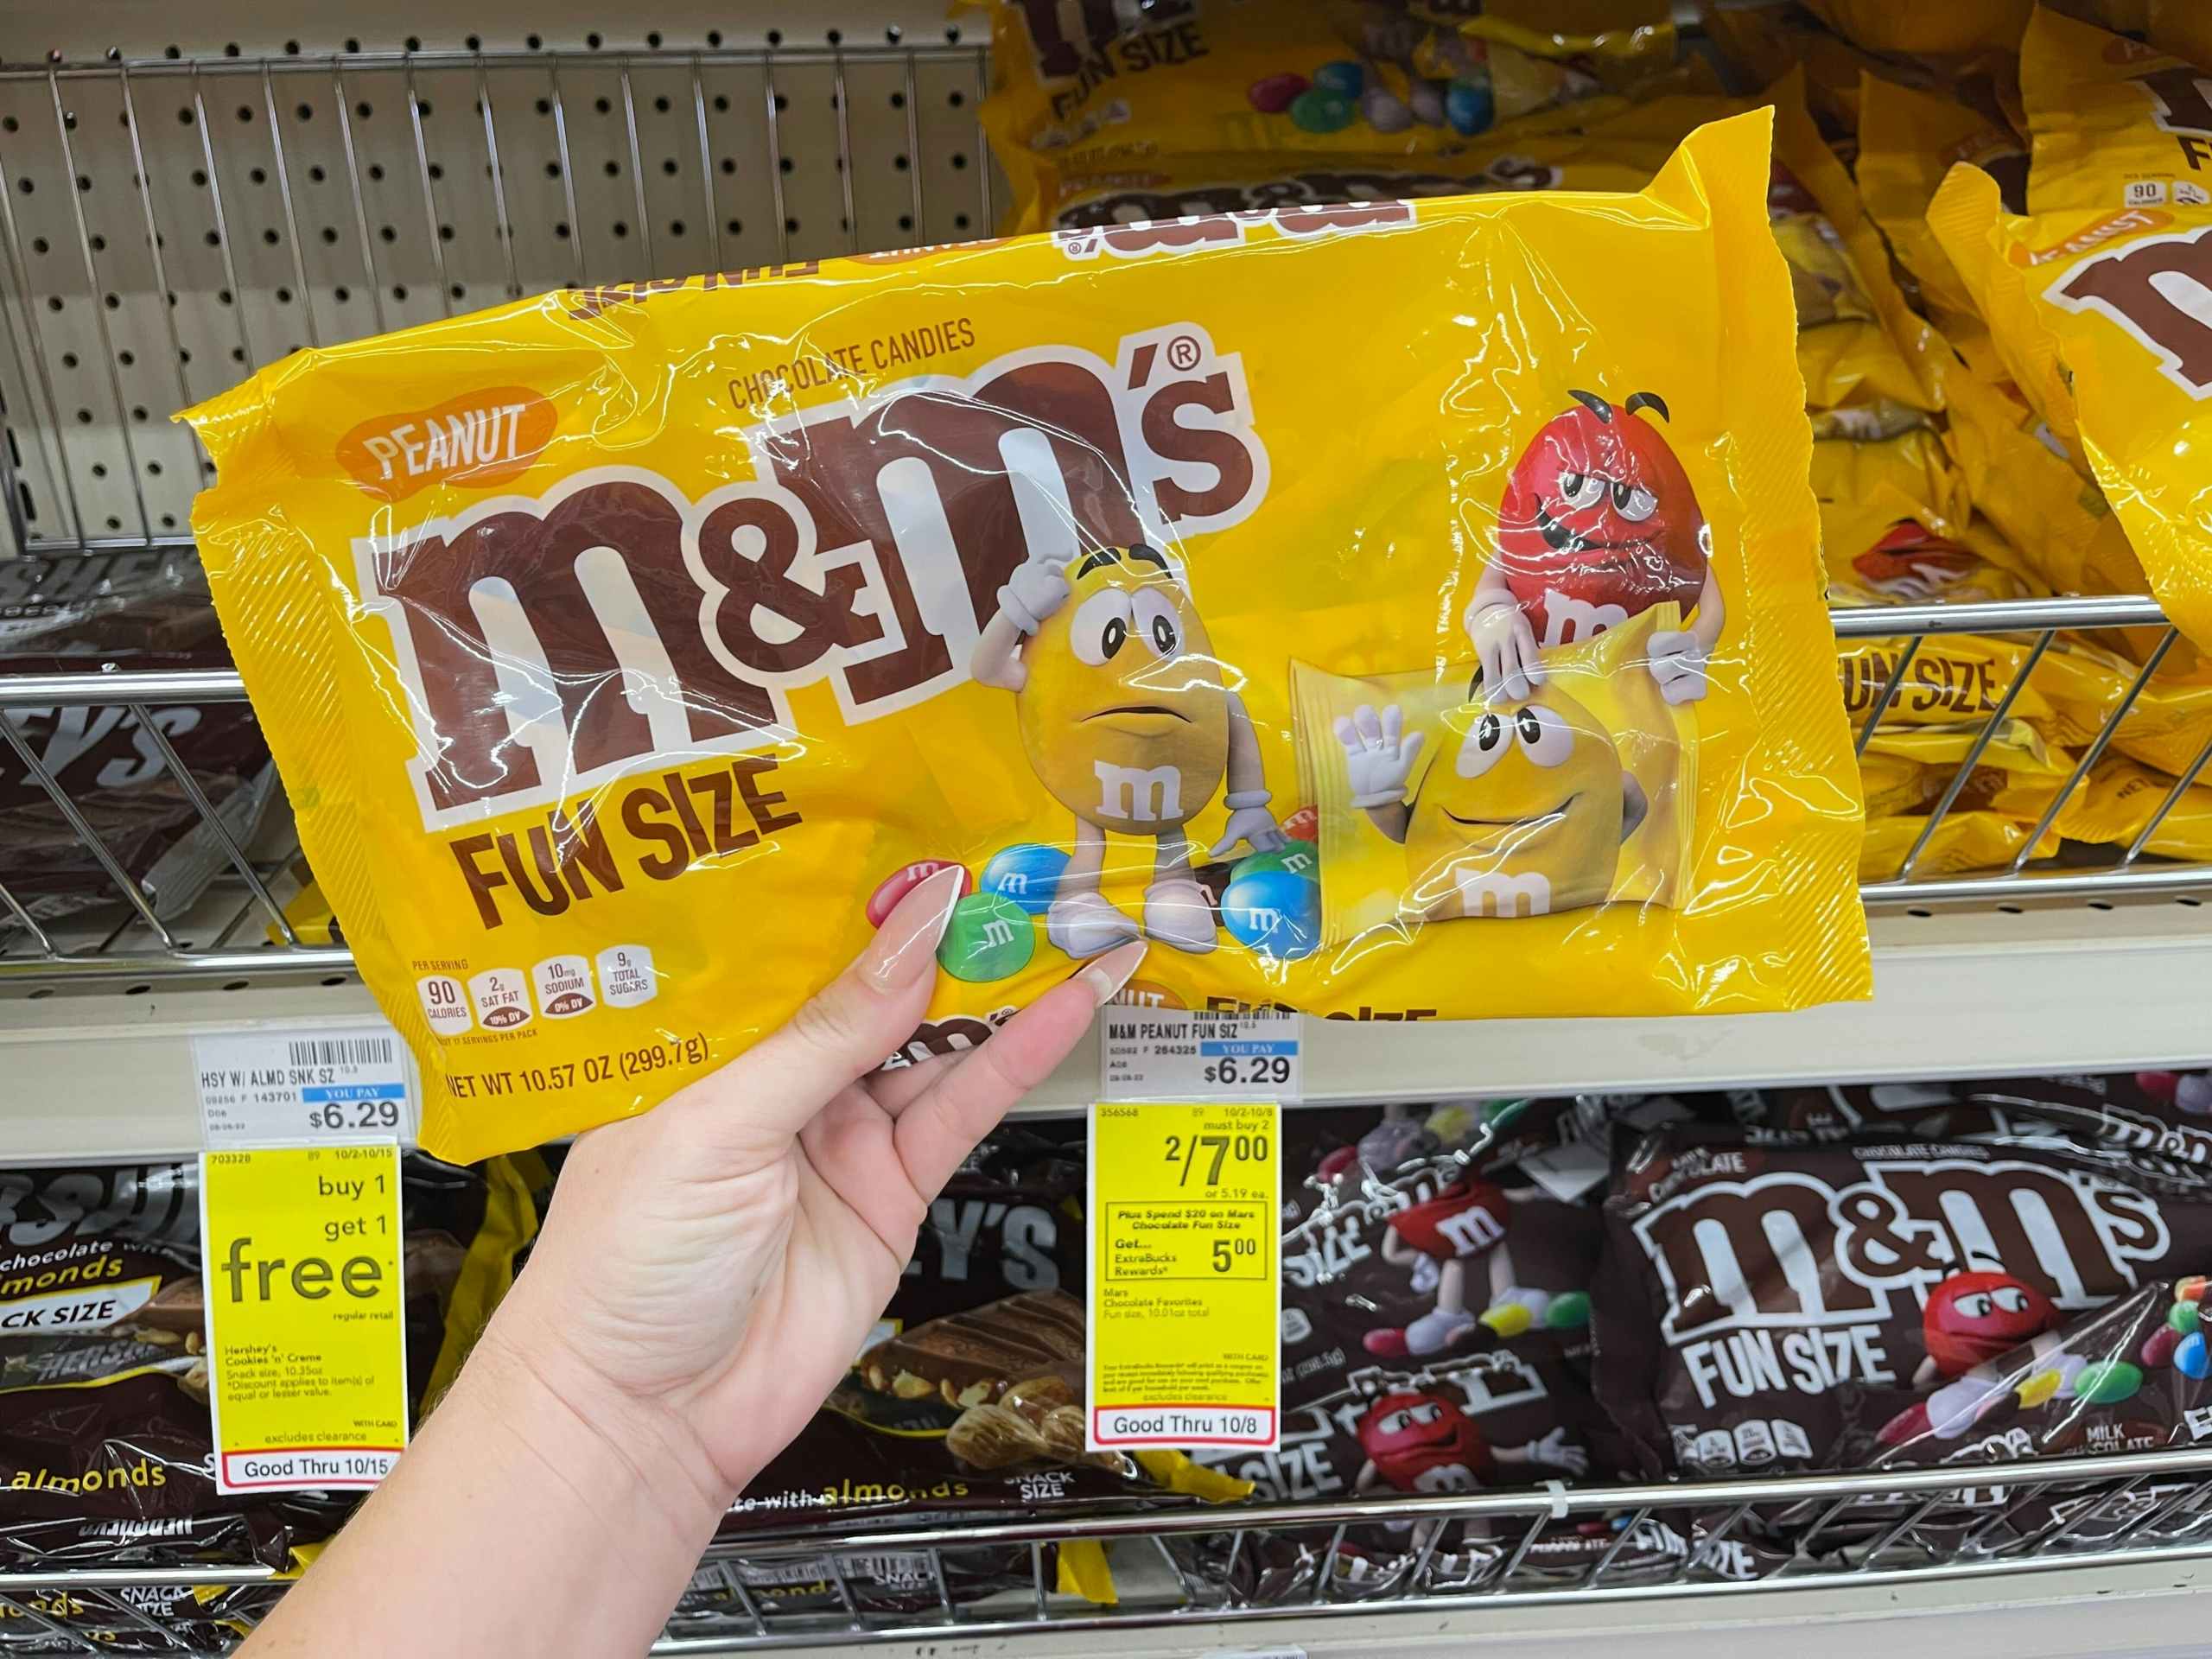 mms on sale two for $7 at CVS